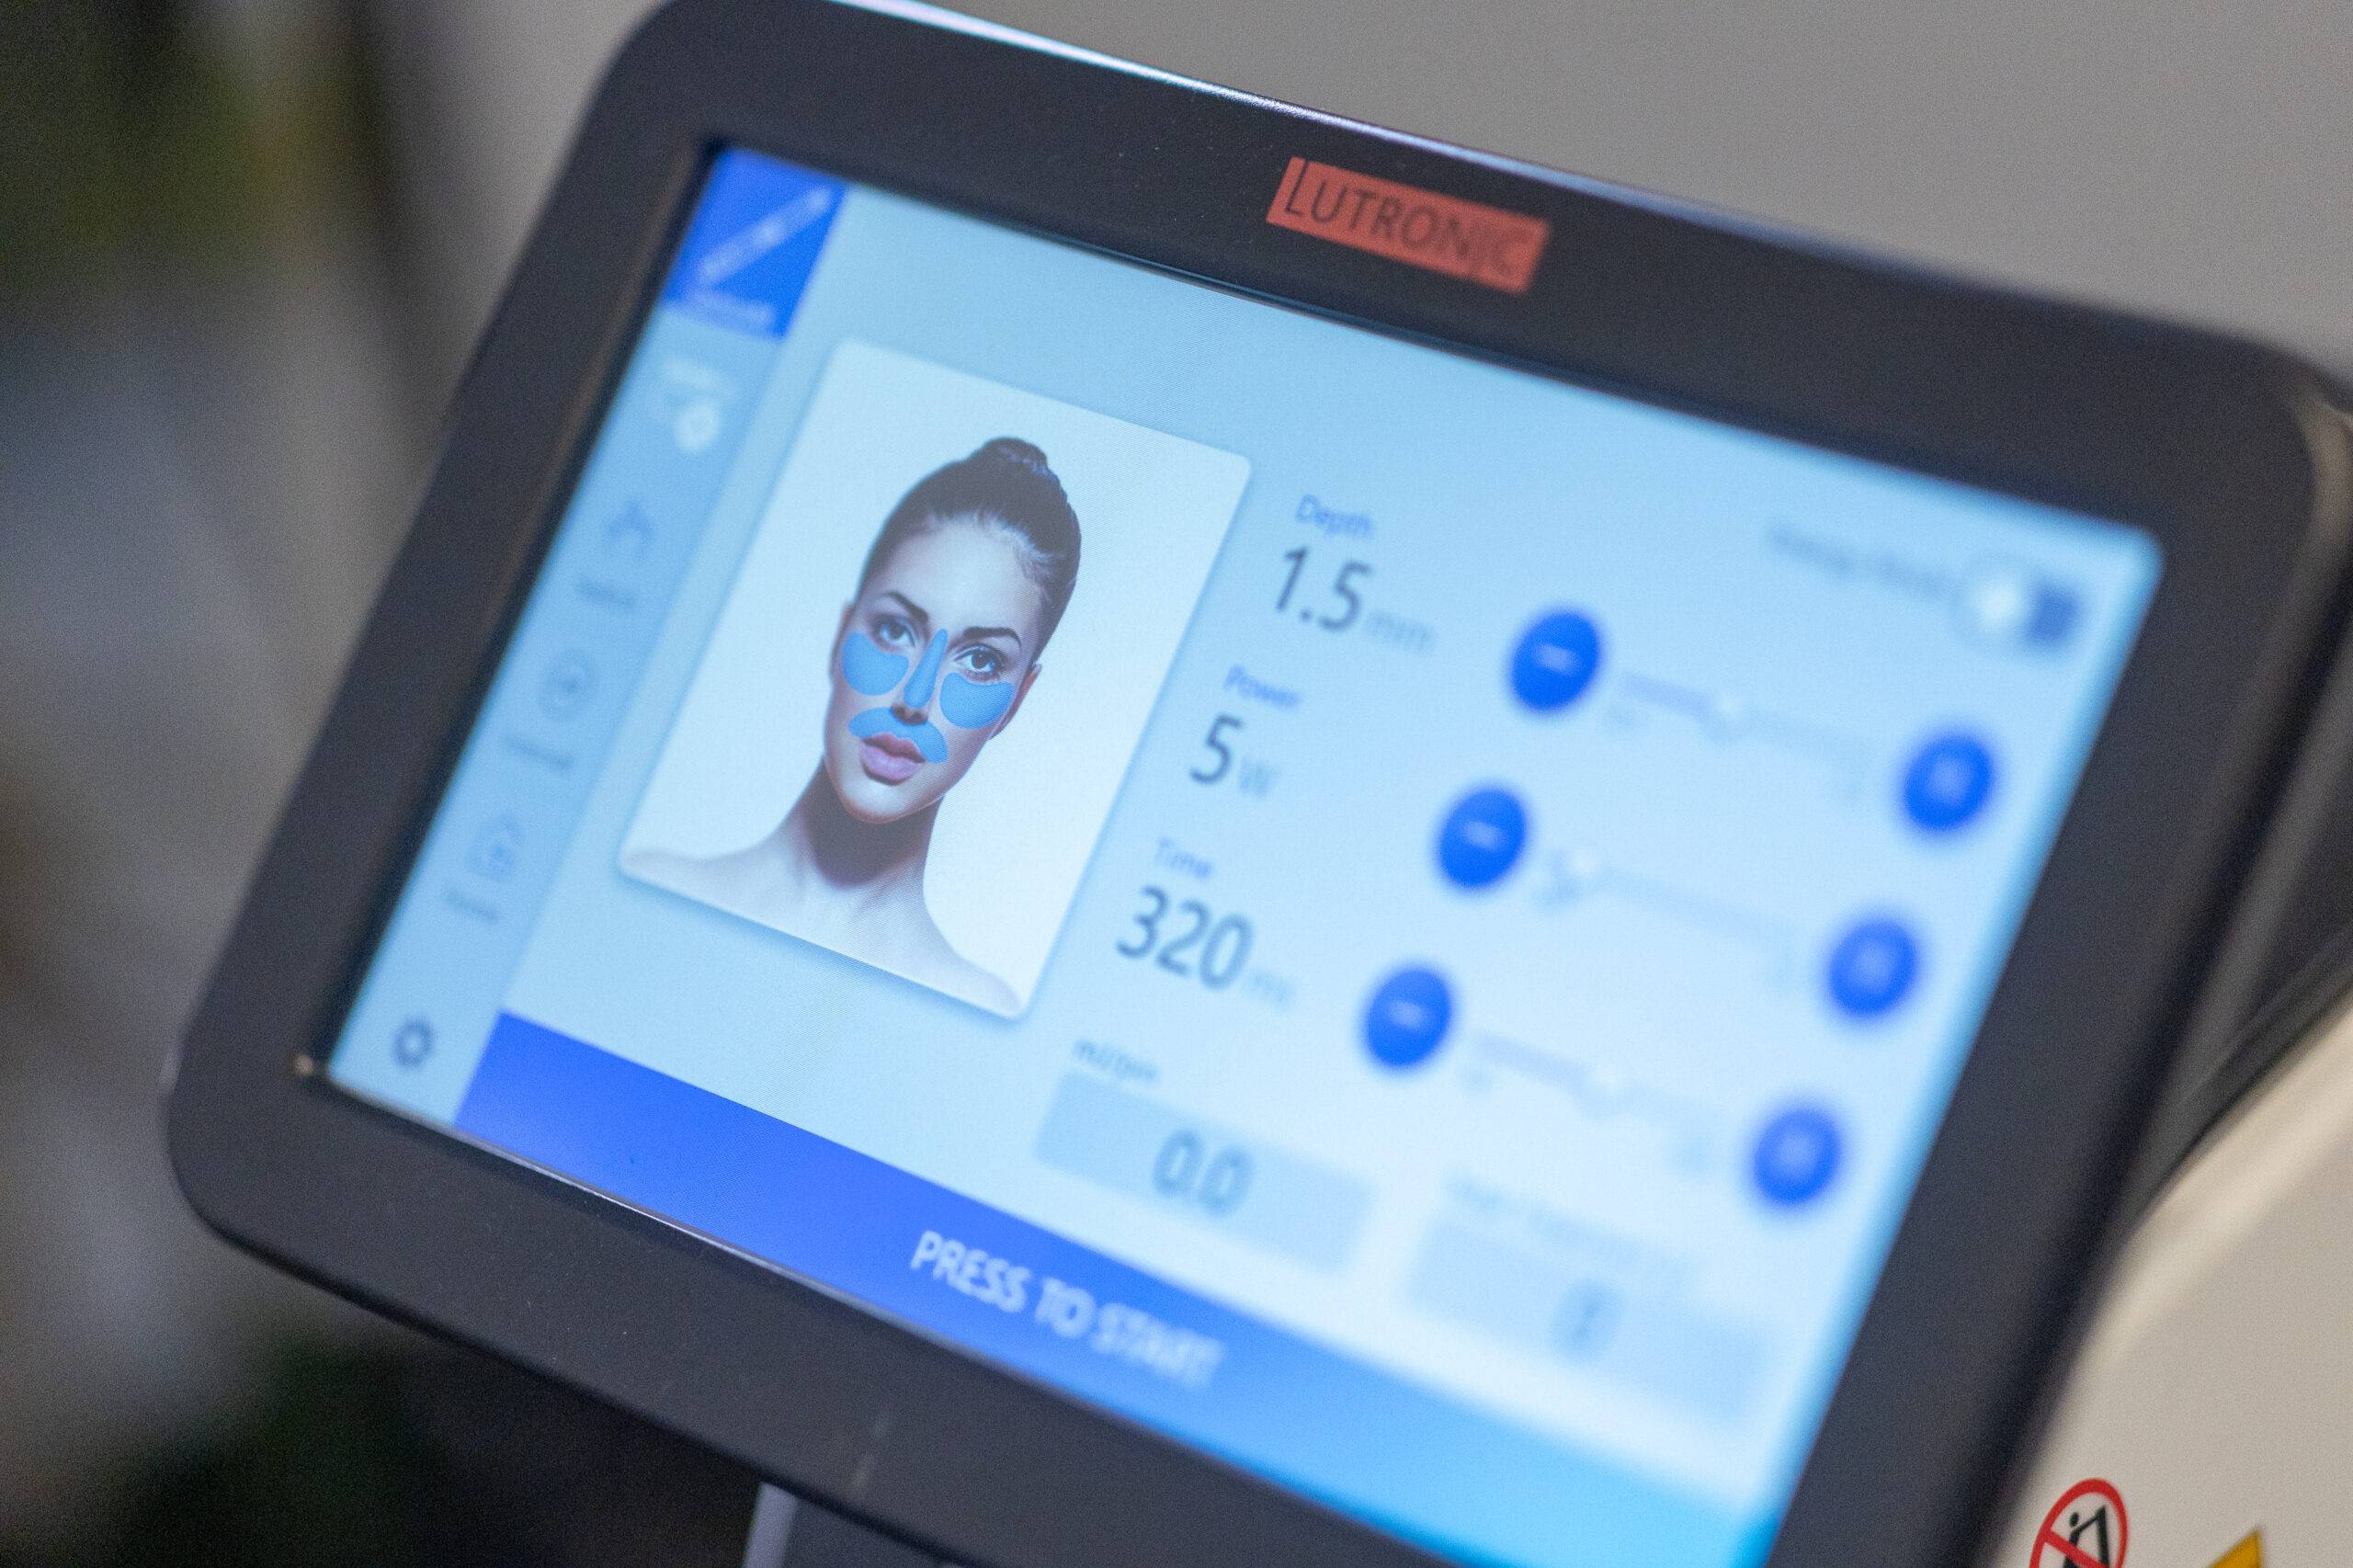 A close-up view of a Genius Radiofrequency Microneedling device screen displaying settings and a graphical representation of a woman's face for treatment purposes.